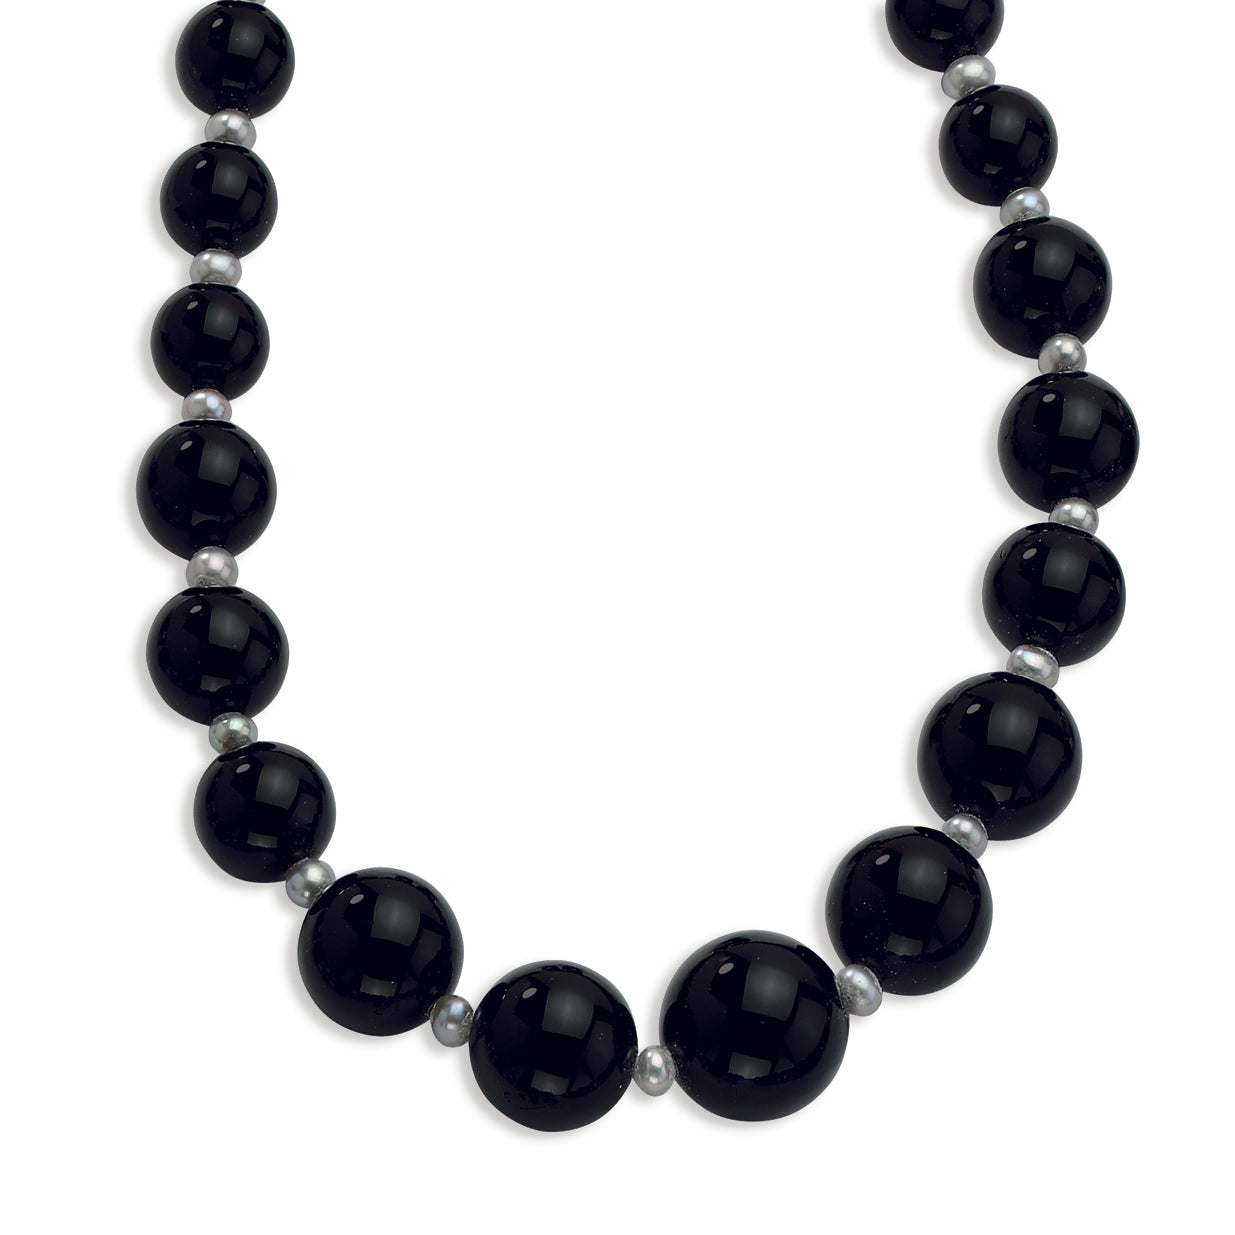 Sterling Silver 8-16mm Graduated Blk Agate-FW Cult Slvr Pearl Necklace